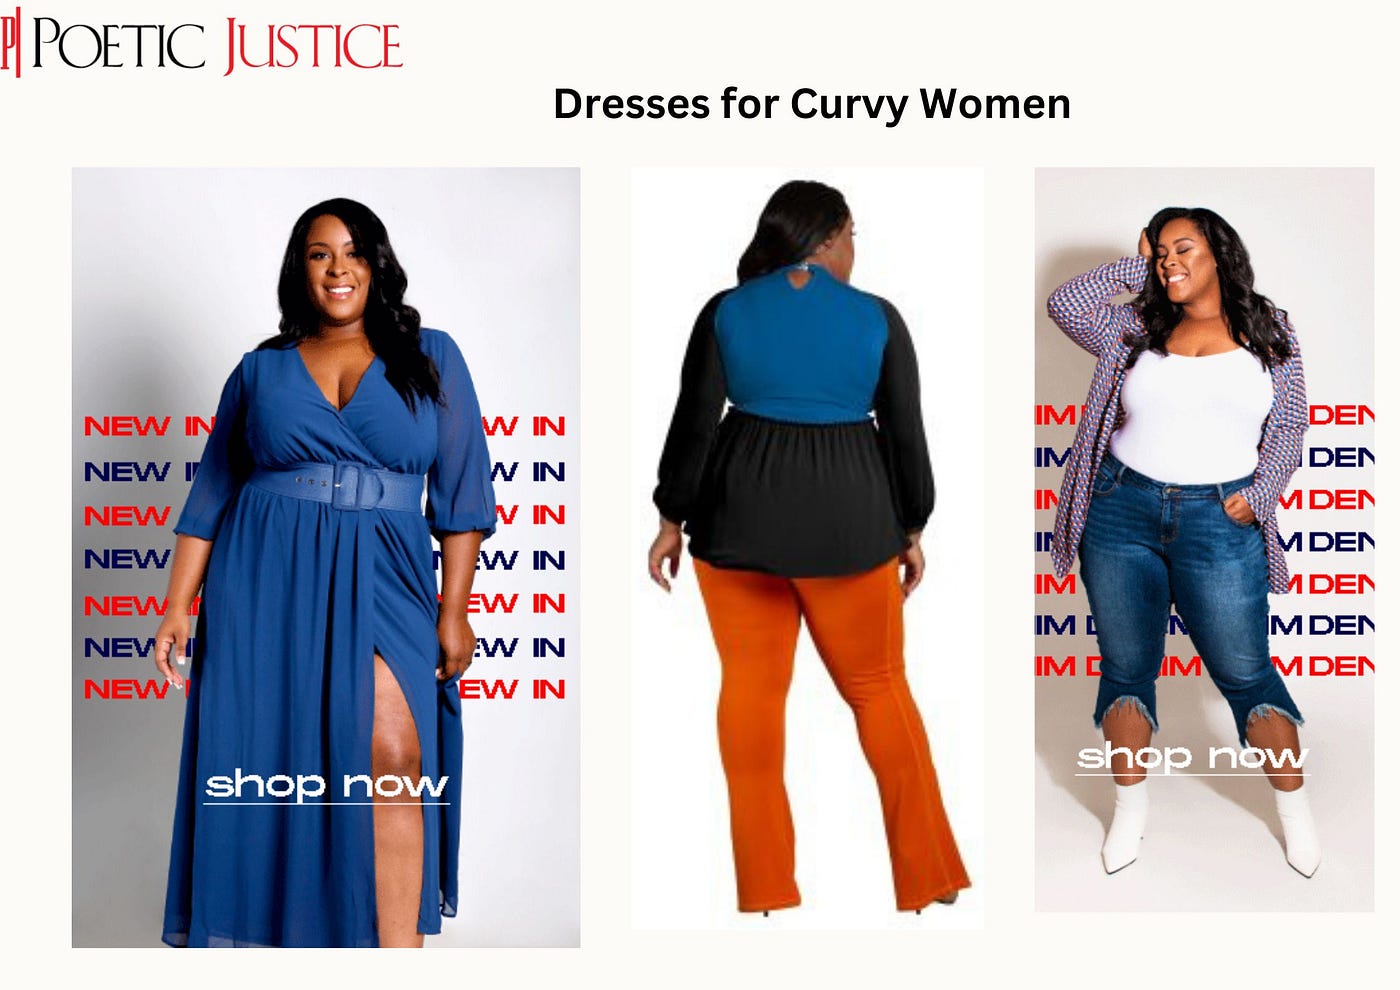 How to Style an Apple Shape Body  plus size fashion tips 